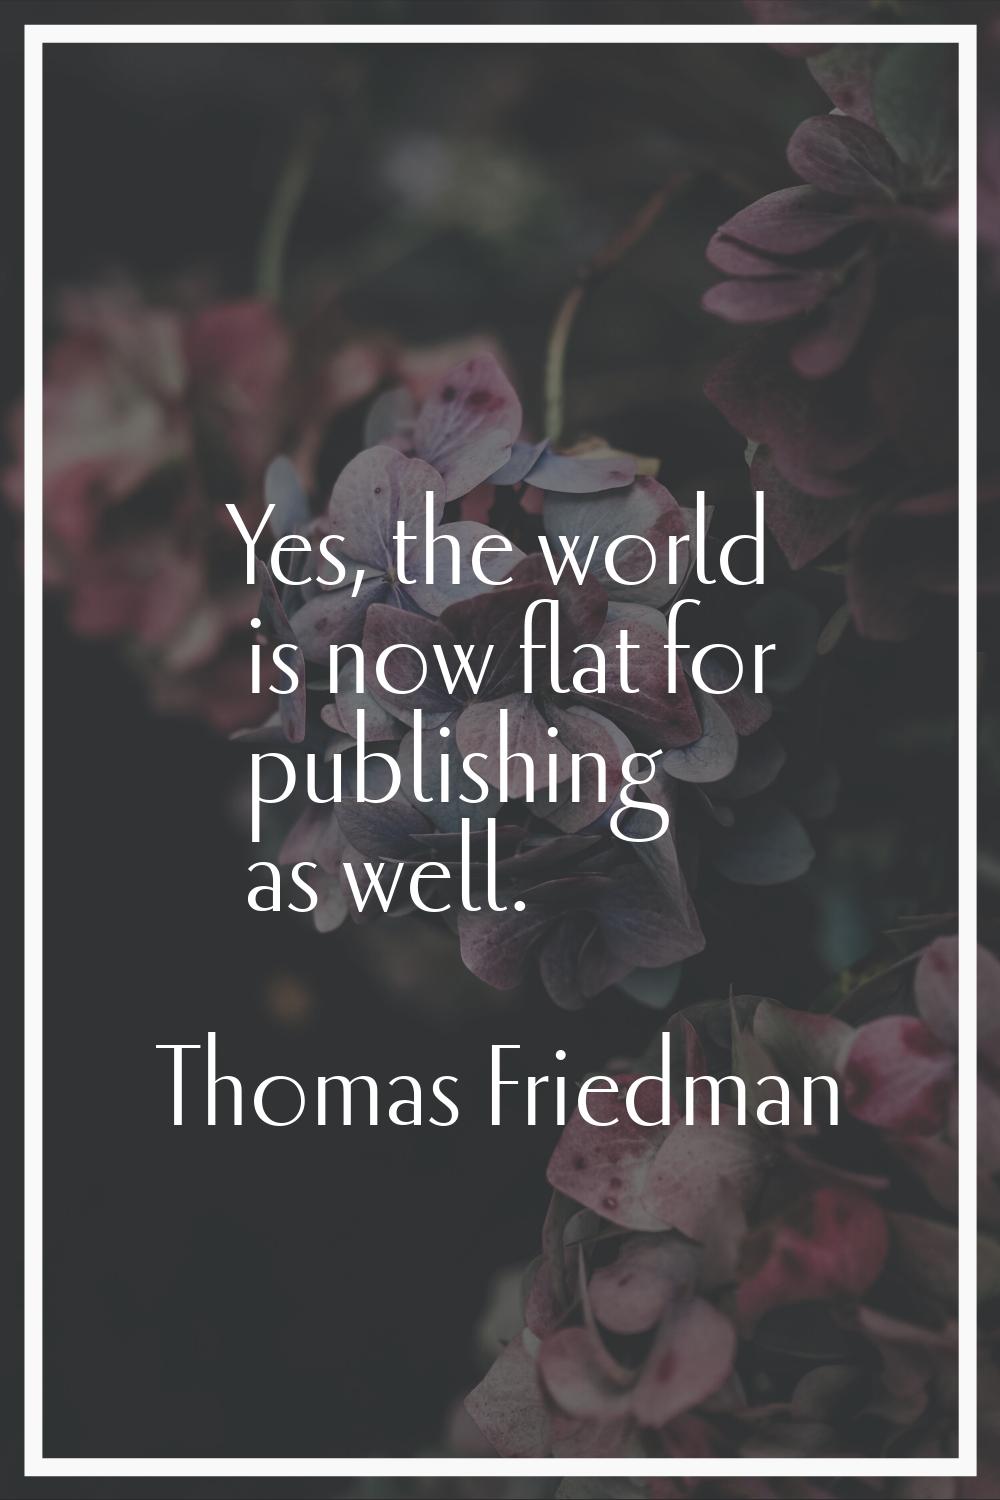 Yes, the world is now flat for publishing as well.